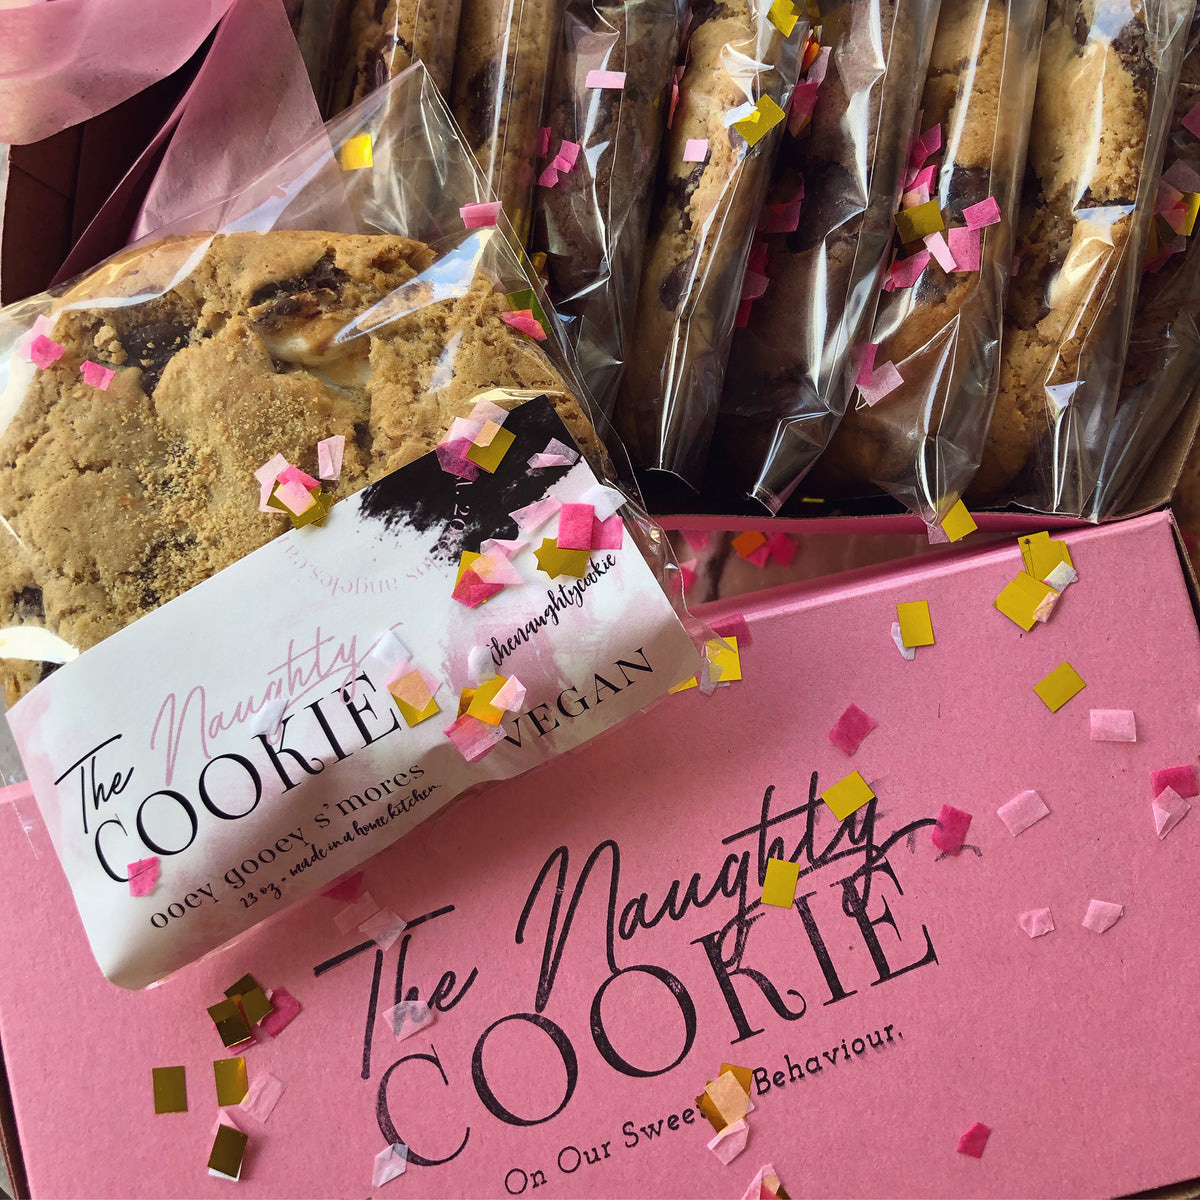 The Naughty Cookie cookies with confetti